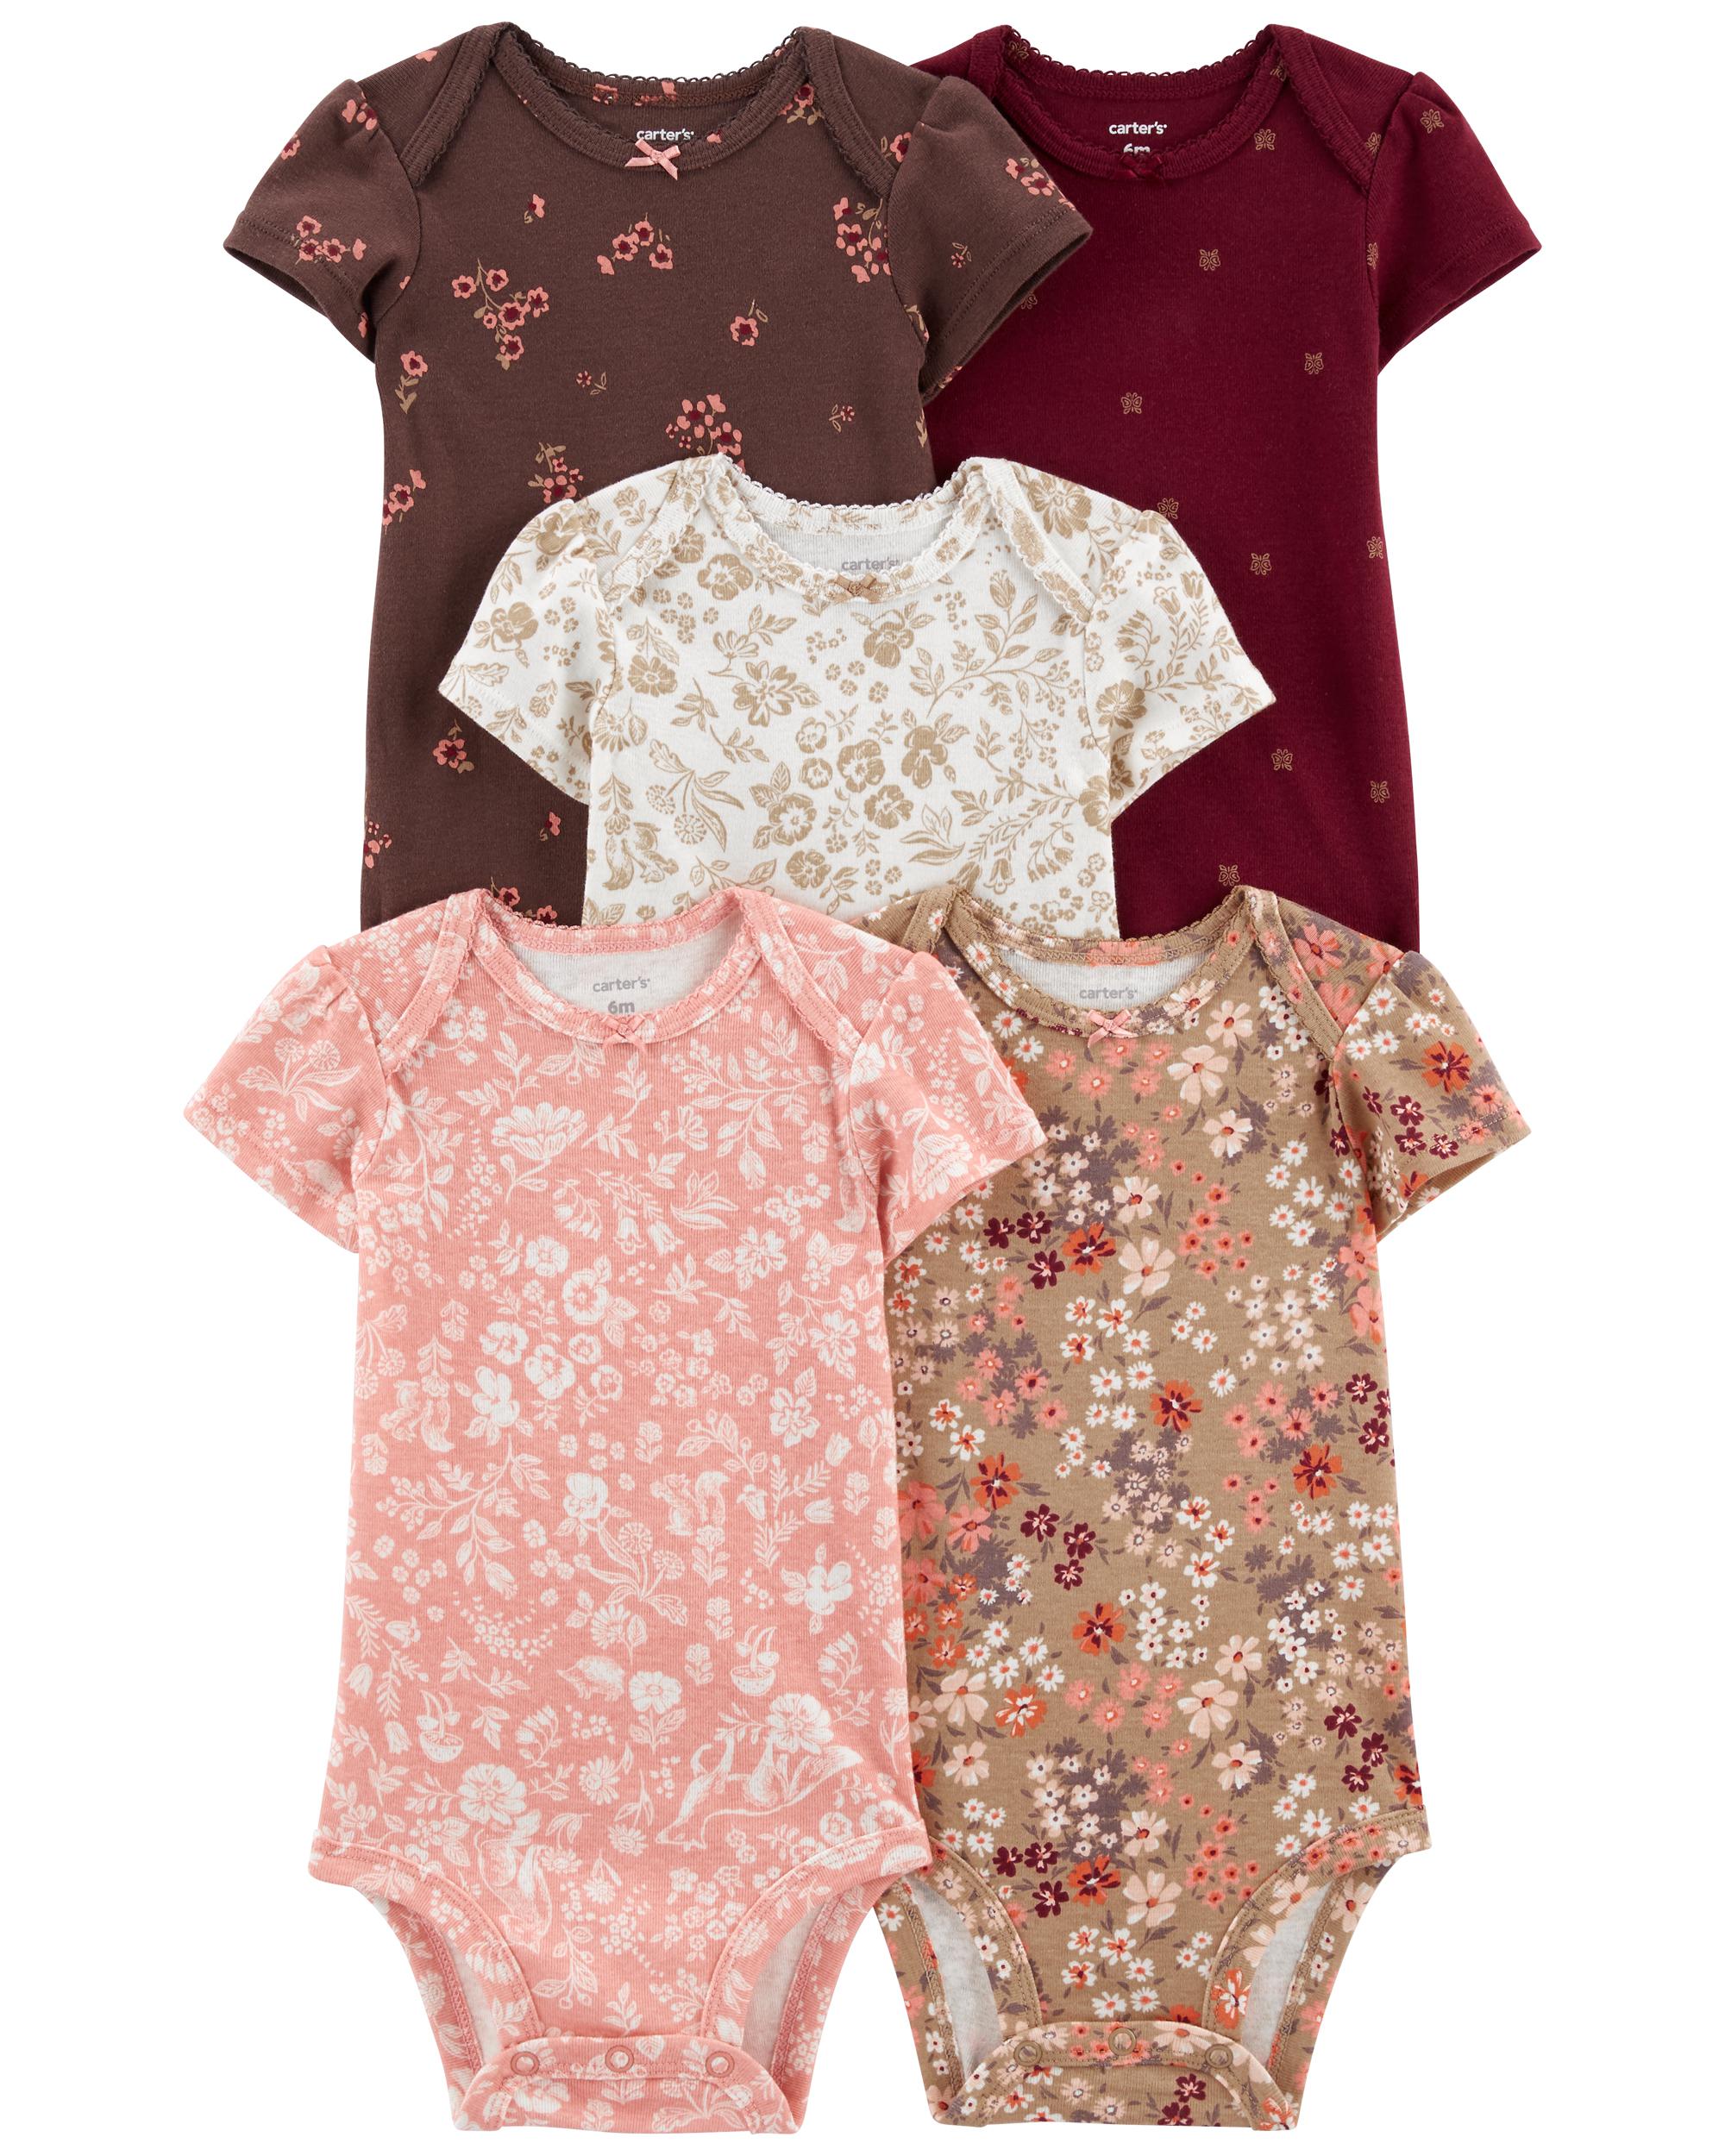 Carter's Baby Girls' 5-Pack S/S Bodysuits - Pink/Poppy - 18 Months